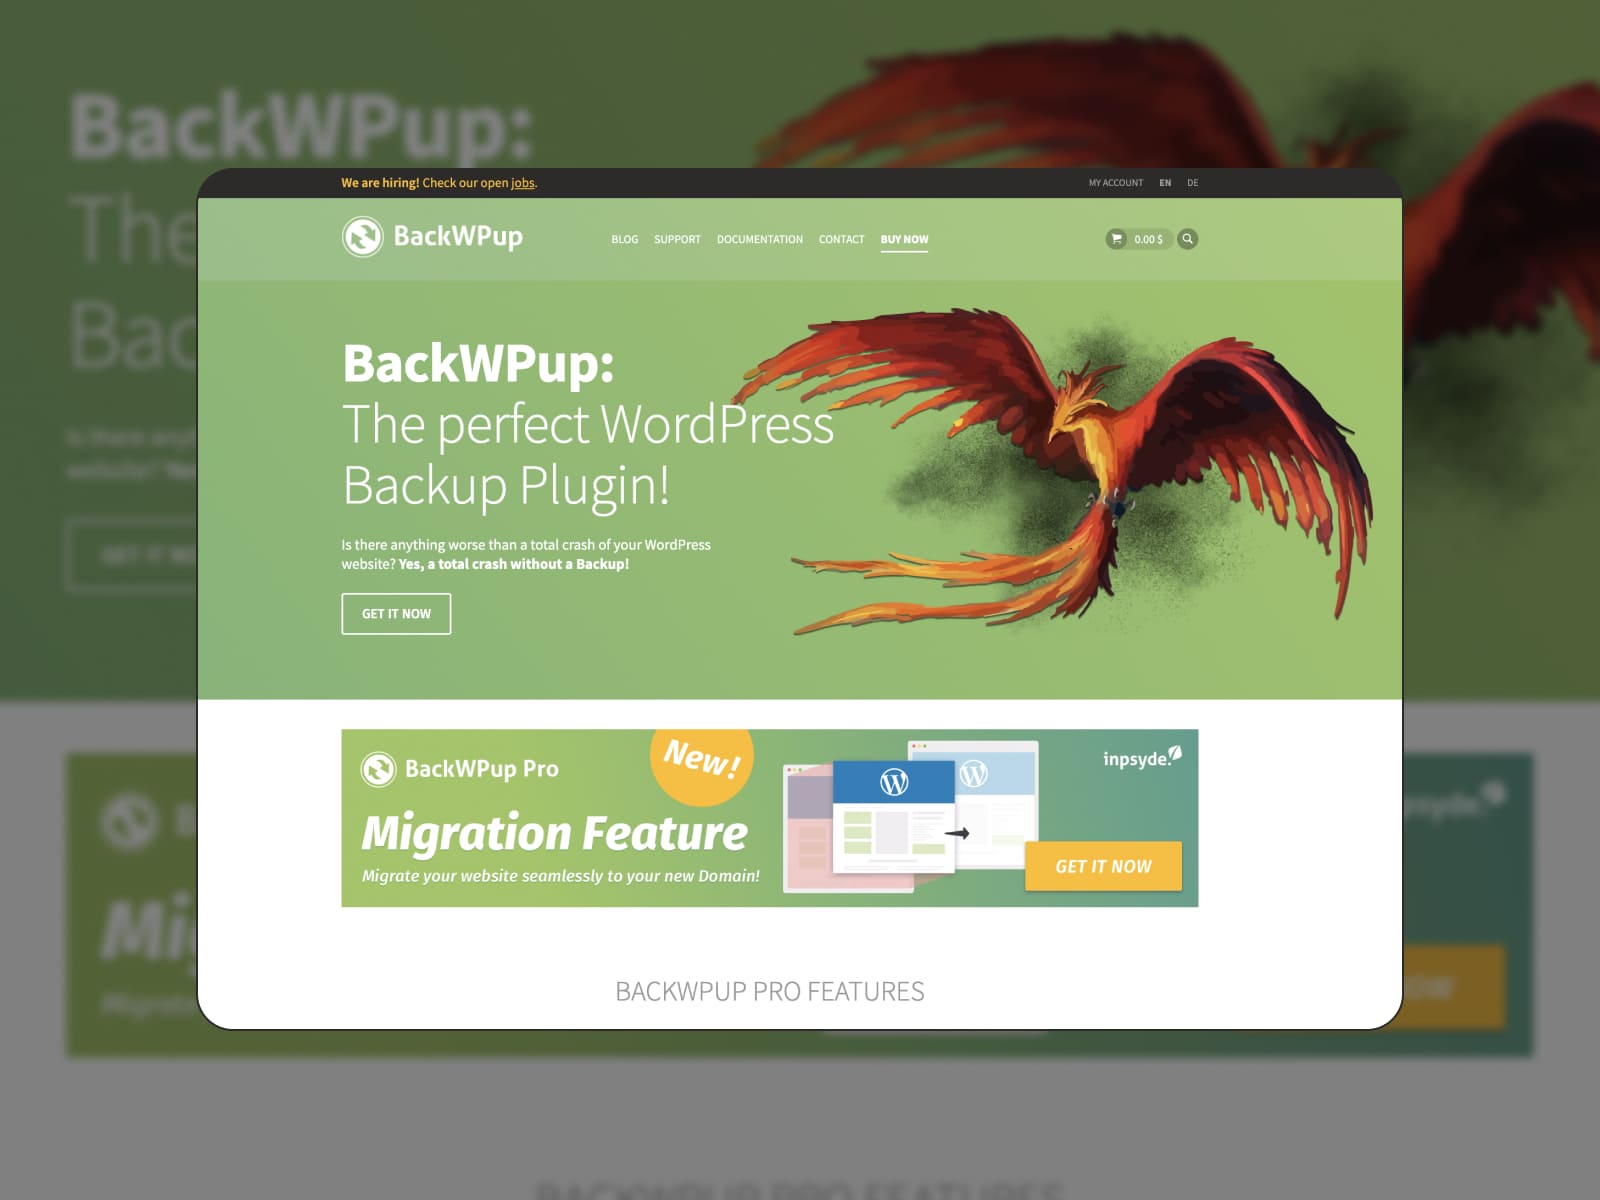 Screenshot of the BackWpup WordPress plugin homepage in green and white colors.